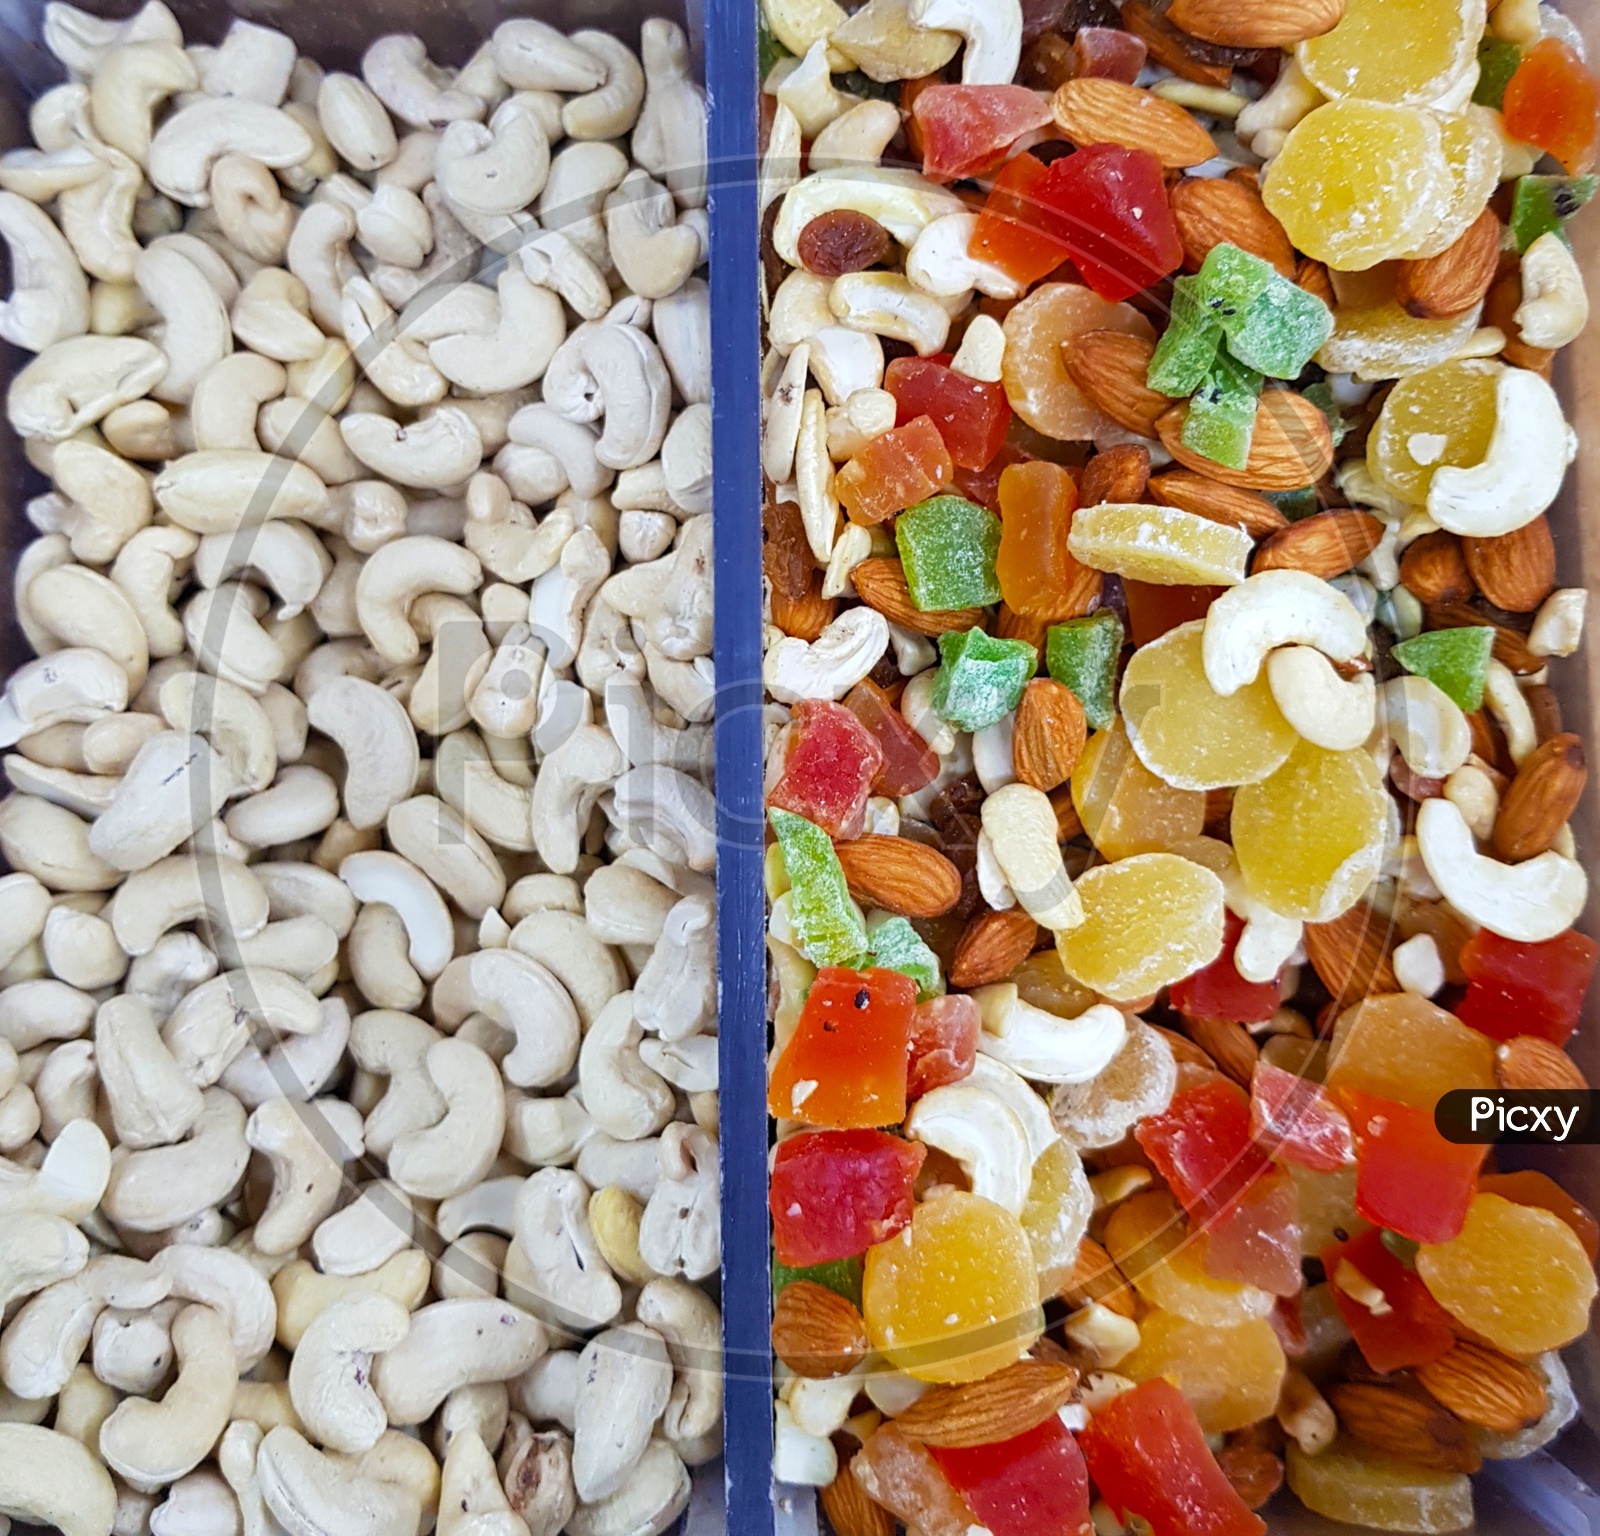 Colourful Dry Fruits And Cashew Nuts In A Shop For Sale